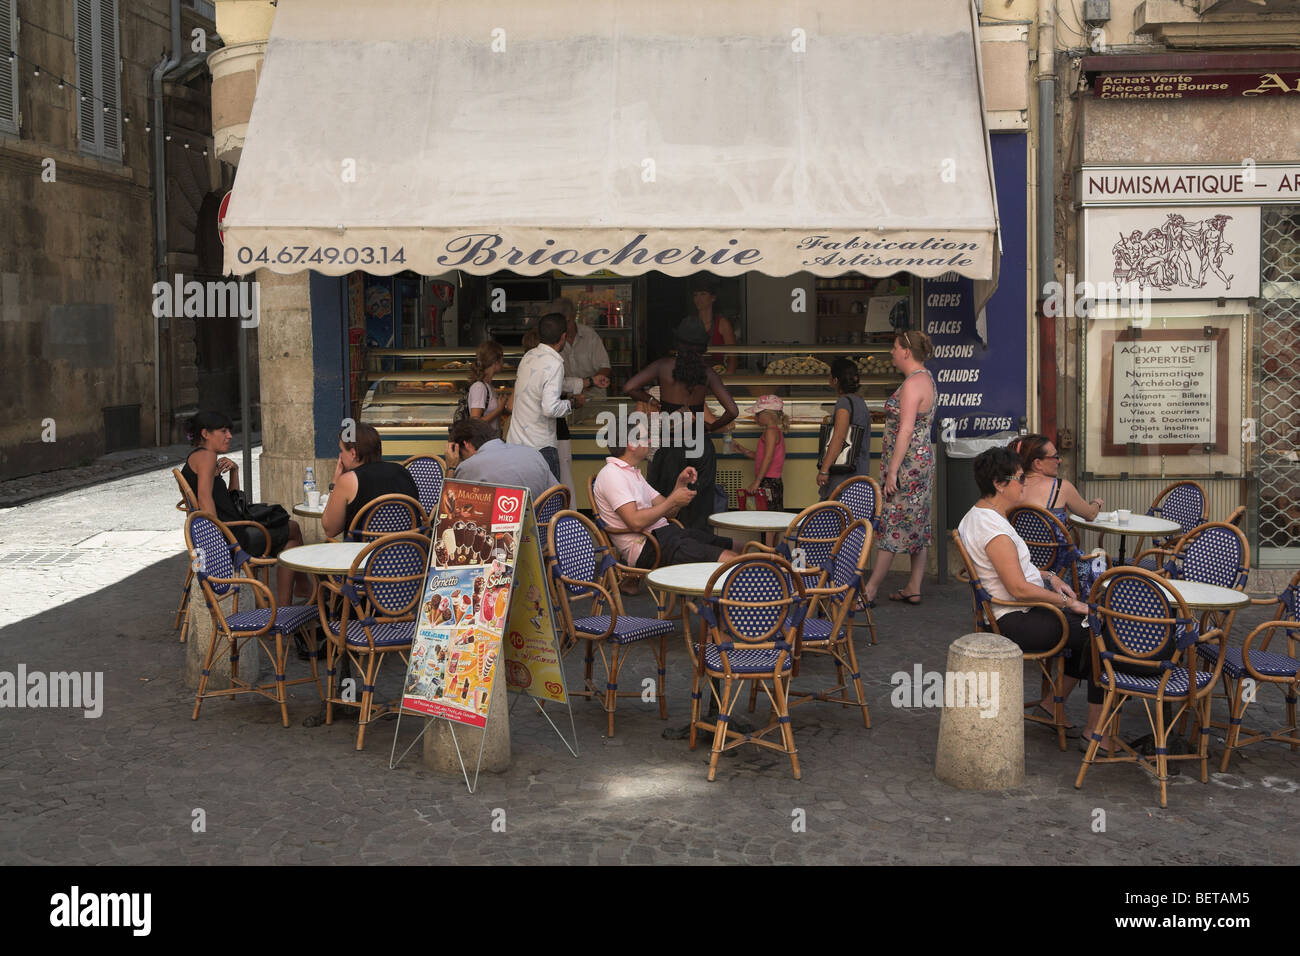 Cafe In Beziers France High Resolution Stock Photography and Images - Alamy